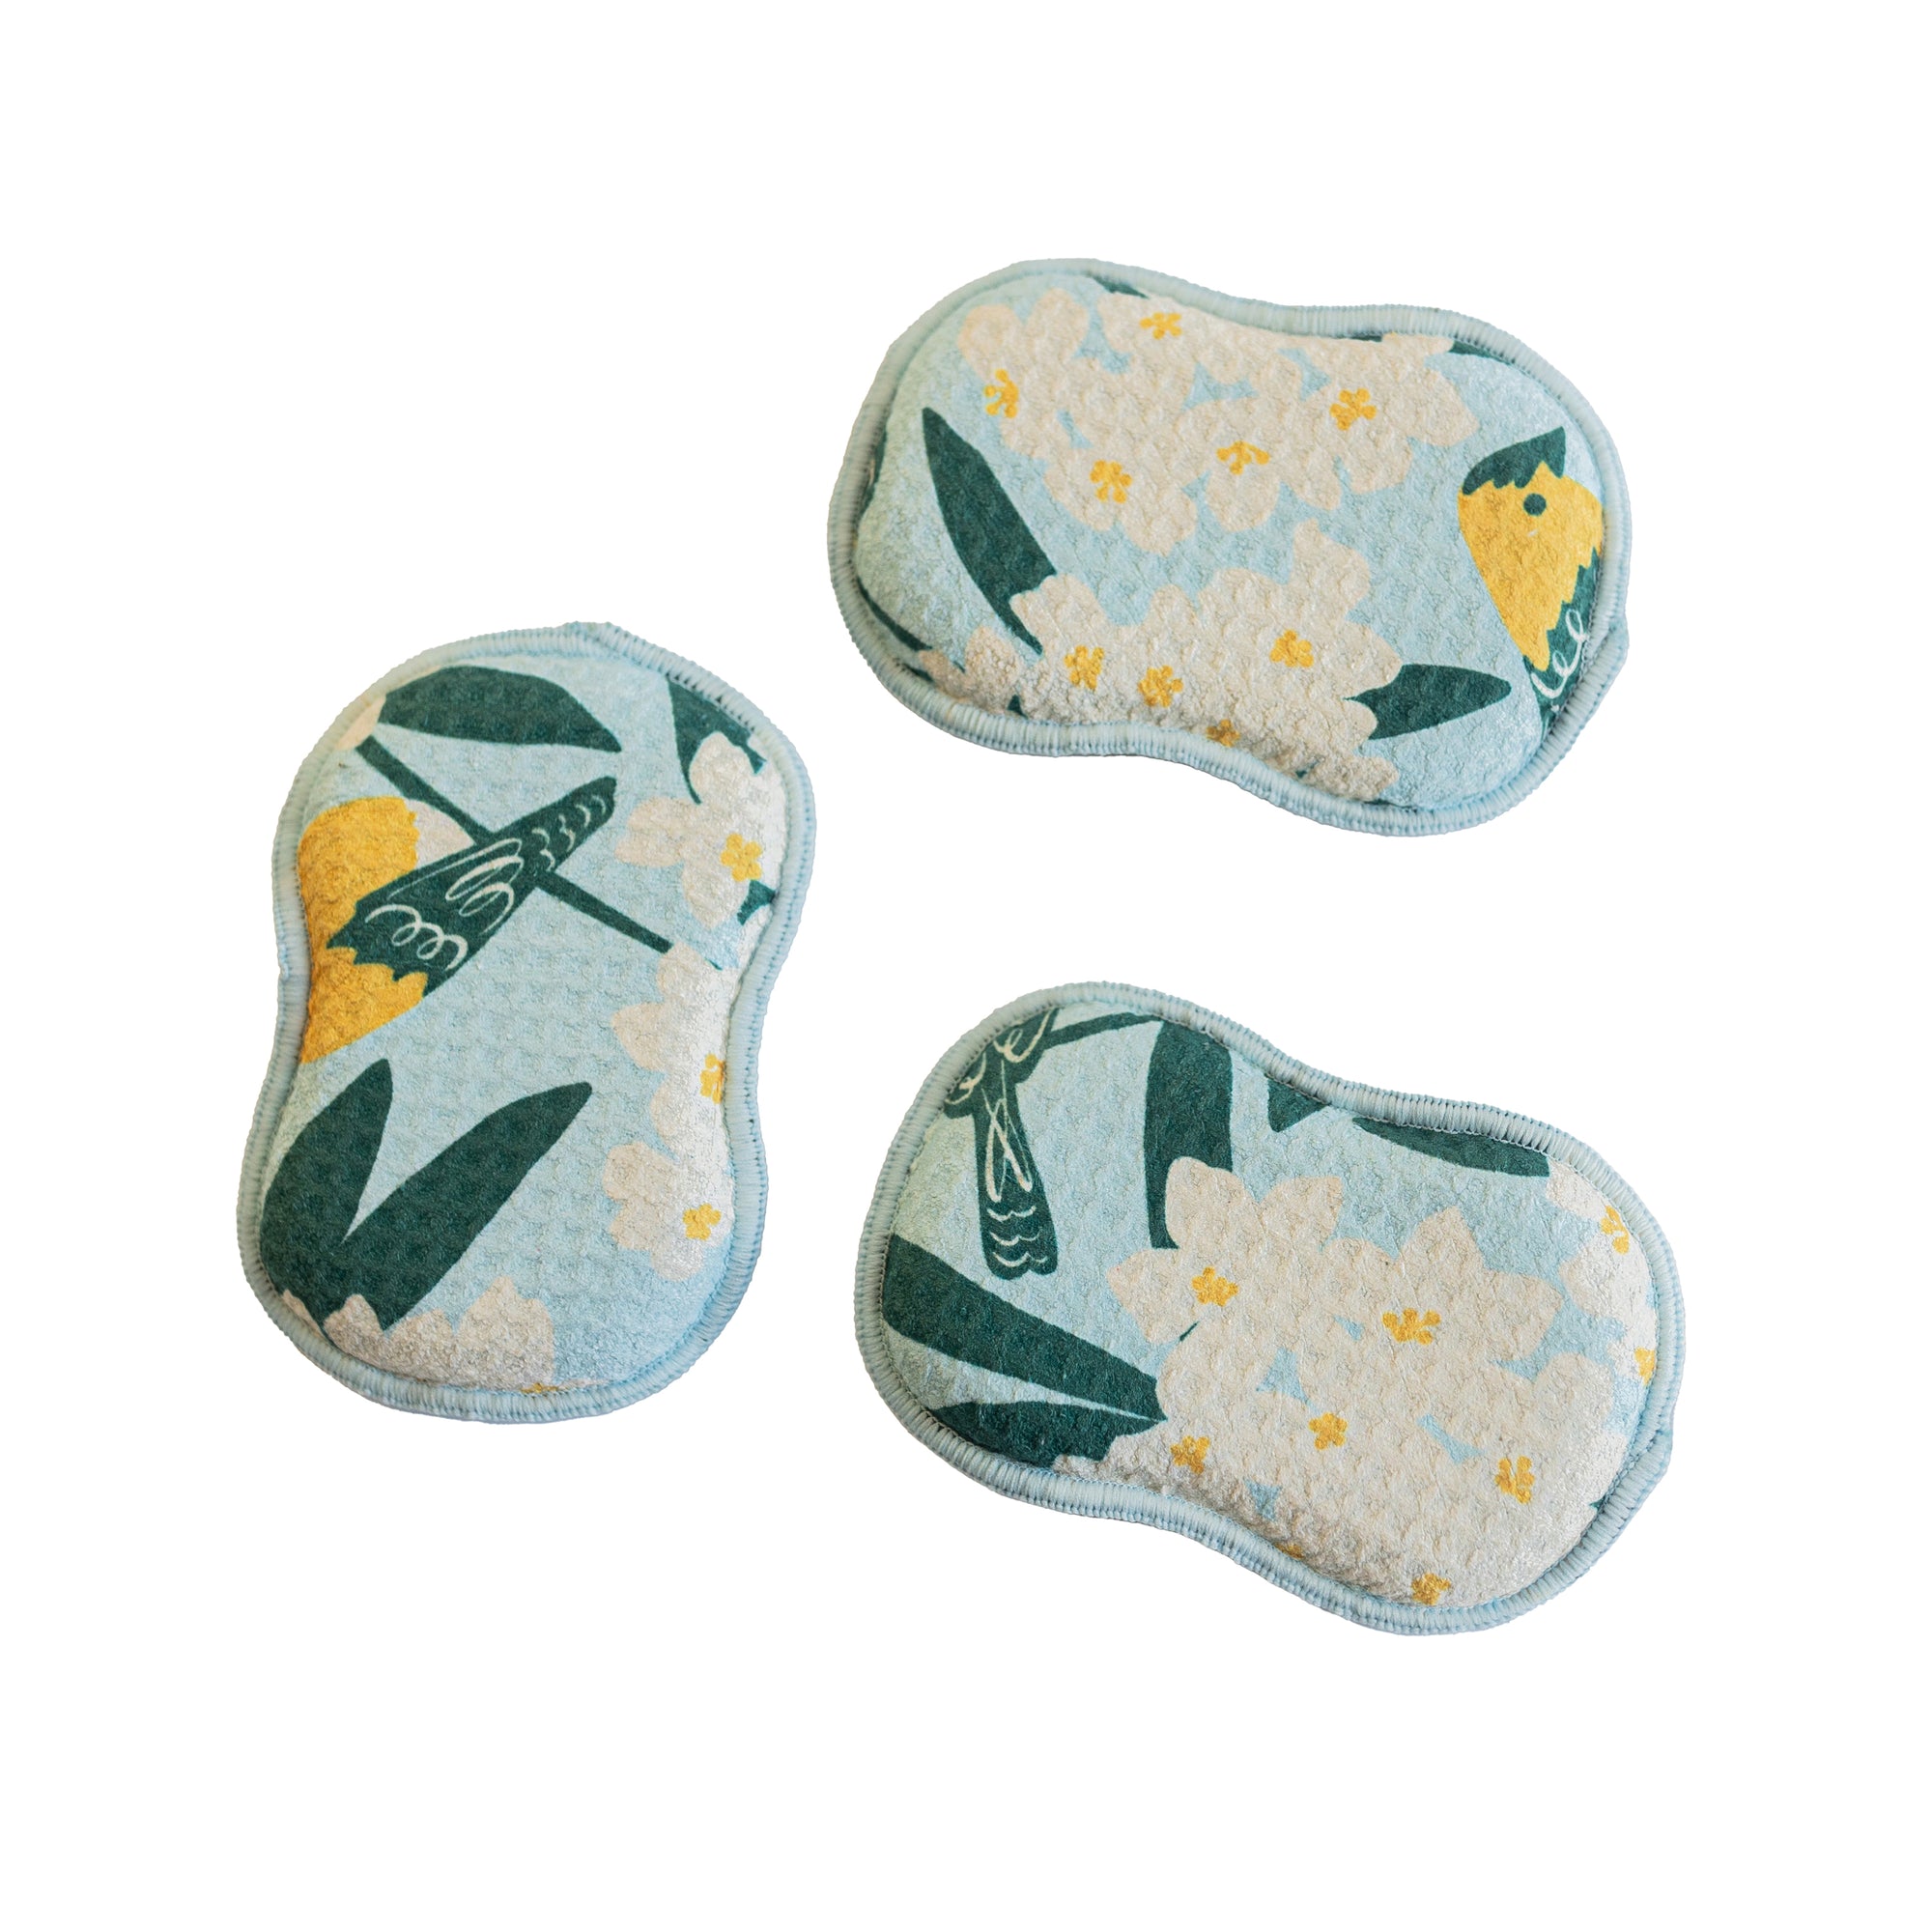 RE:usable Sponges (Set of 3) - Nuthatch Birdsong Sponges & Scouring Pads Once Again Home Co.   